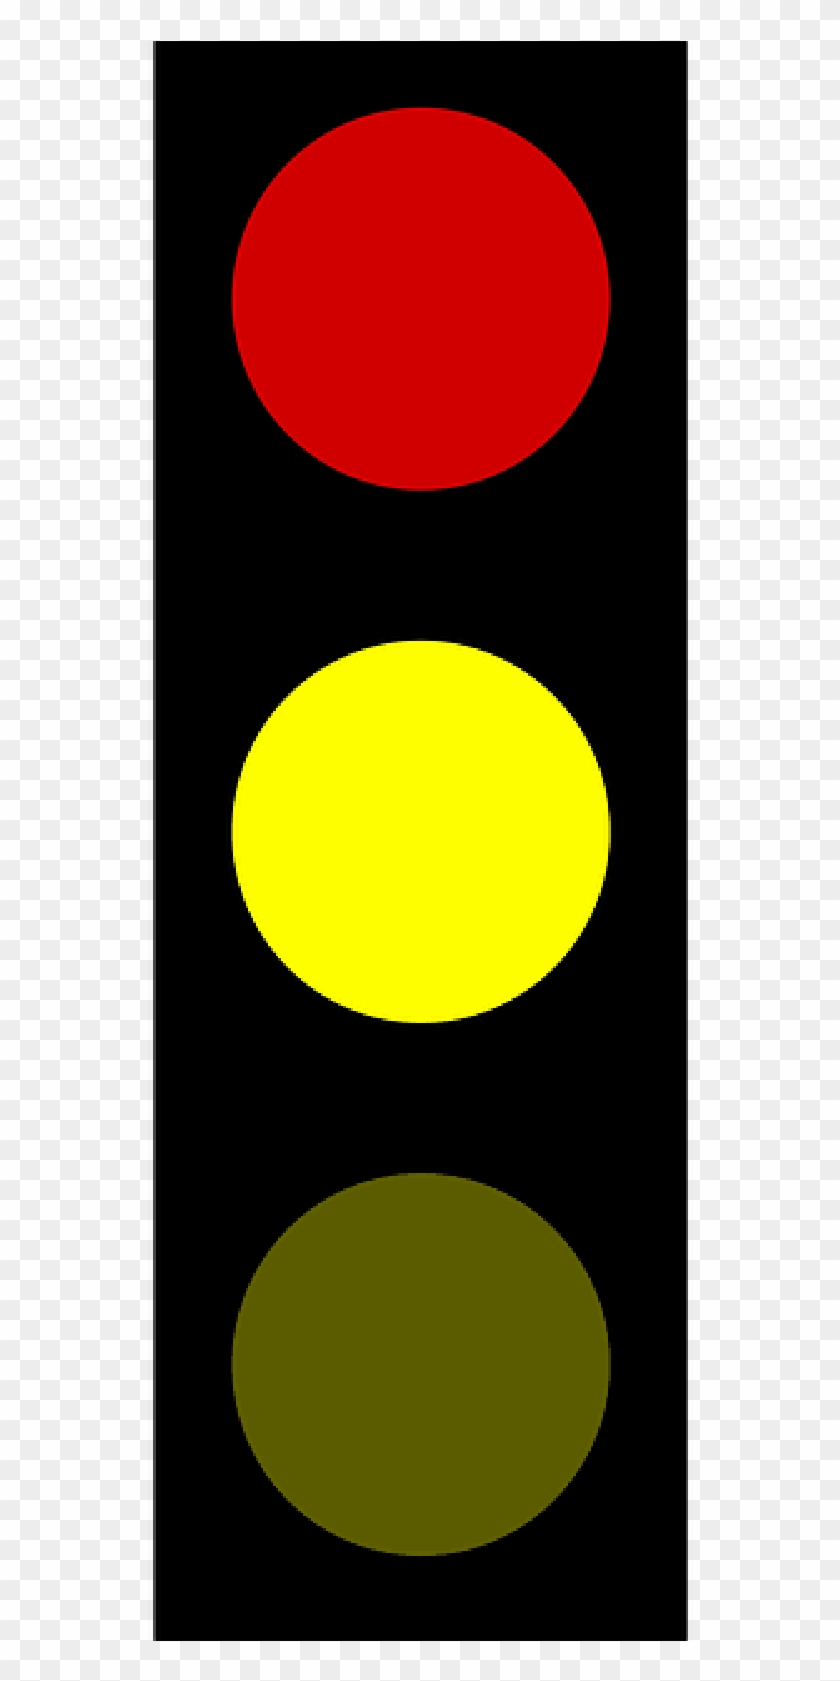 Stoplight Clipart Yellow - Traffic Light - Png Download #2653078